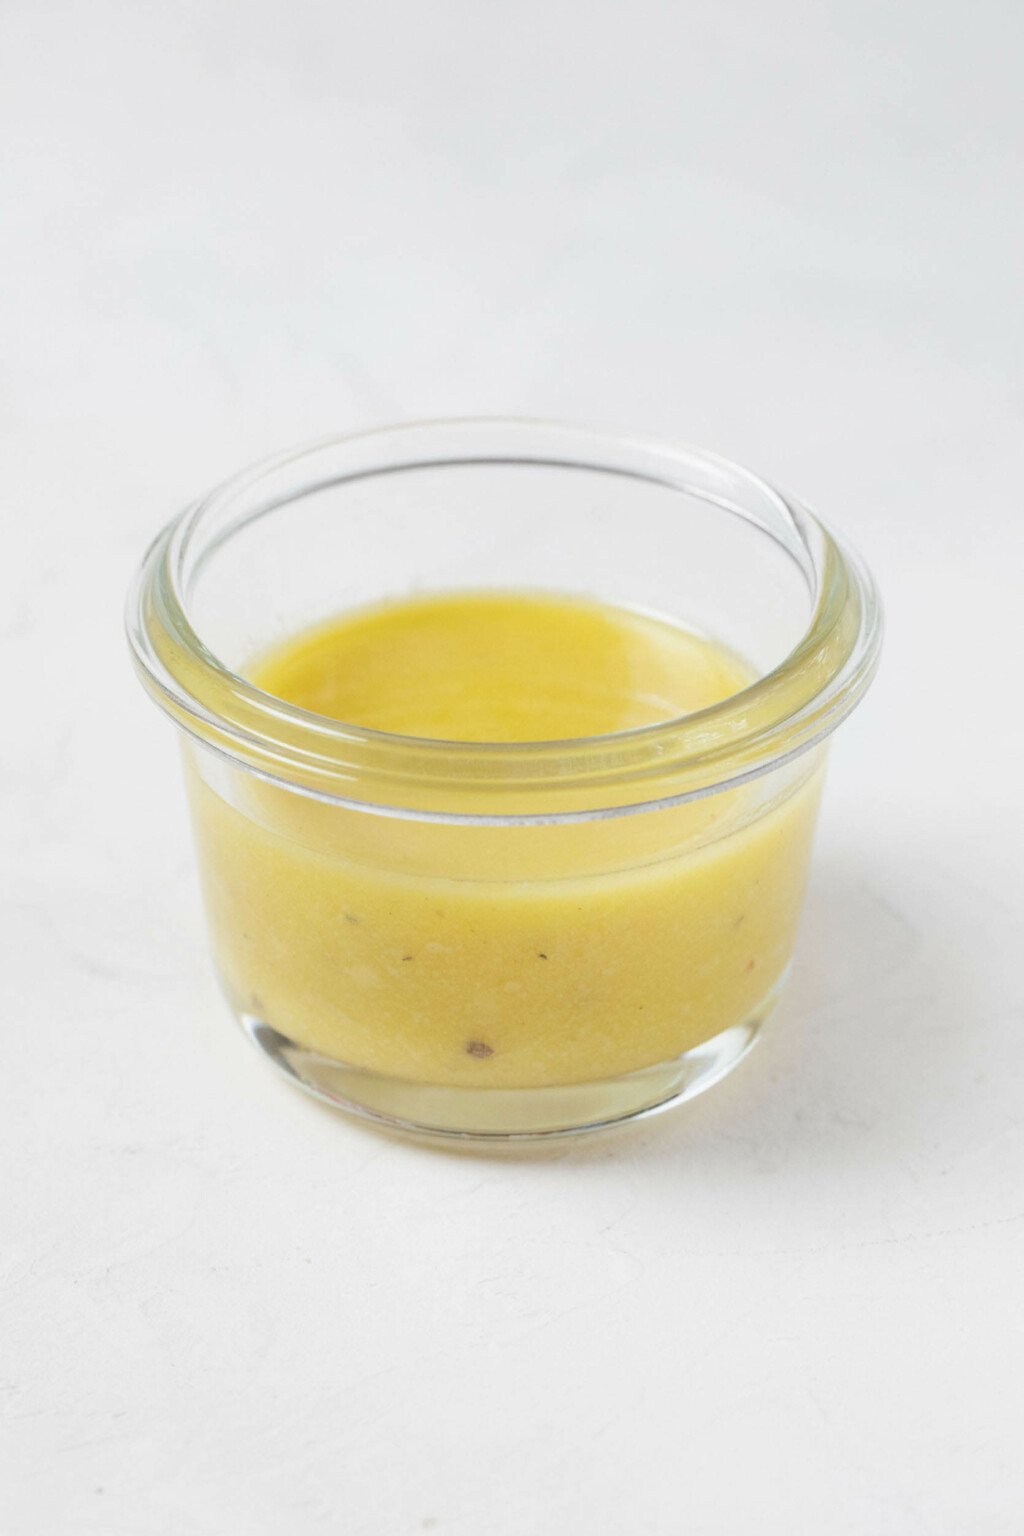 A small, round container of vinaigrette rests on a white surface.